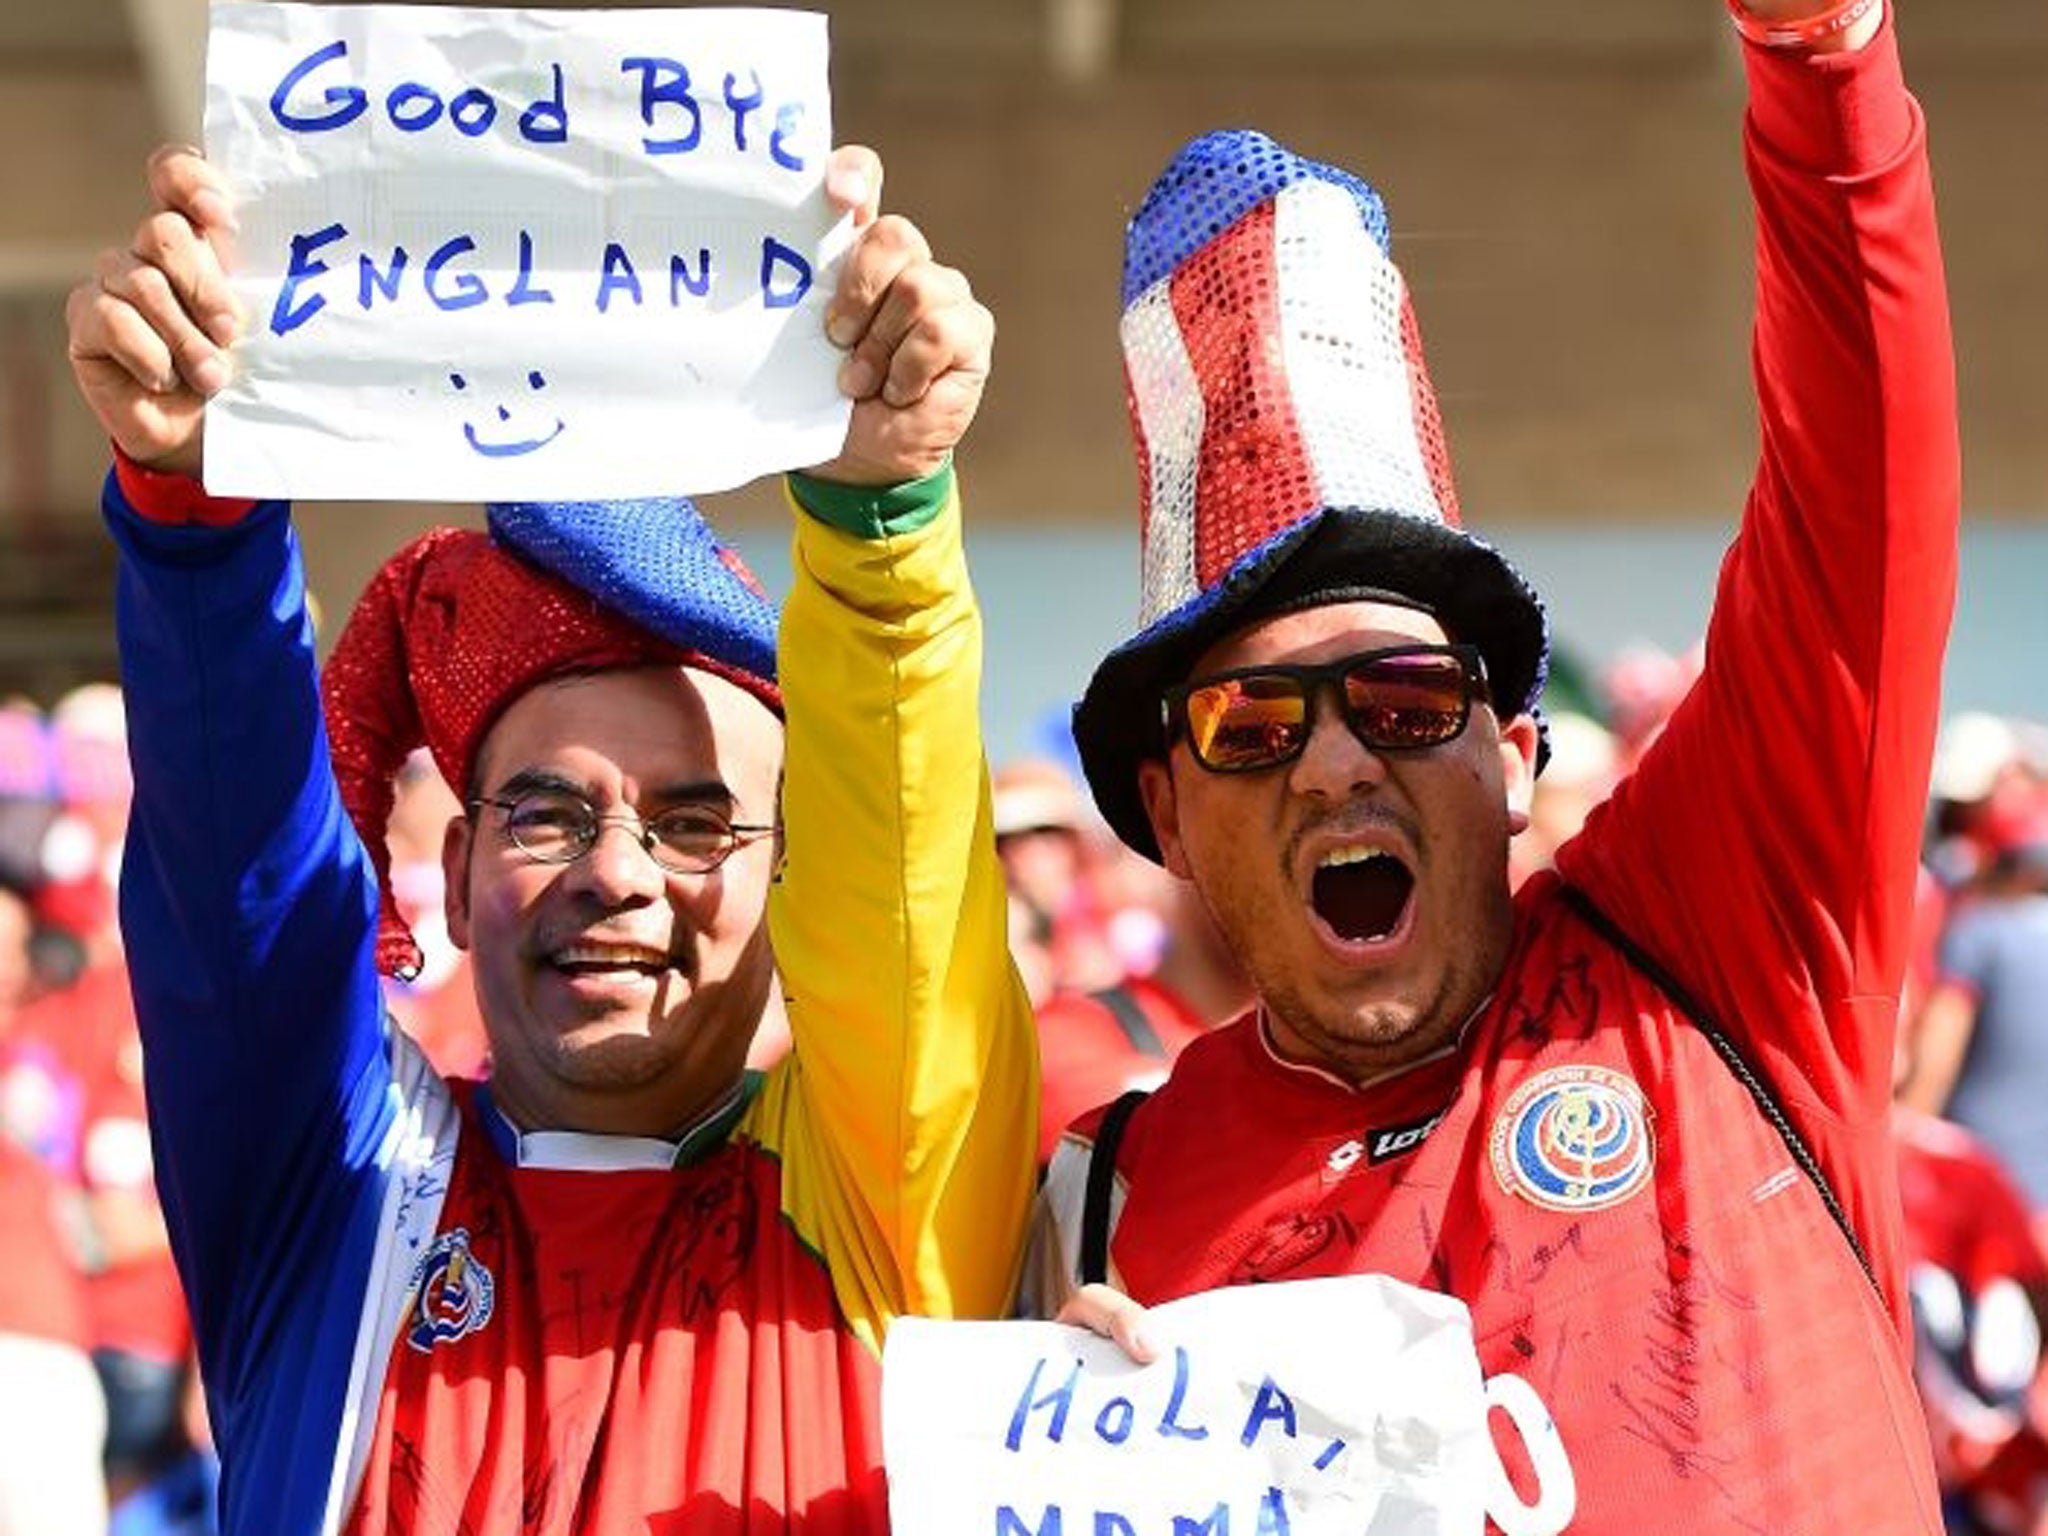 A Costa Rica fan holds up a sign reading "Good Bye England" during the 2014 FIFA World Cup Brazil Group D match between Italy and Costa Rica at Arena Pernambuco on June 20, 2014 in Recife, Brazil.